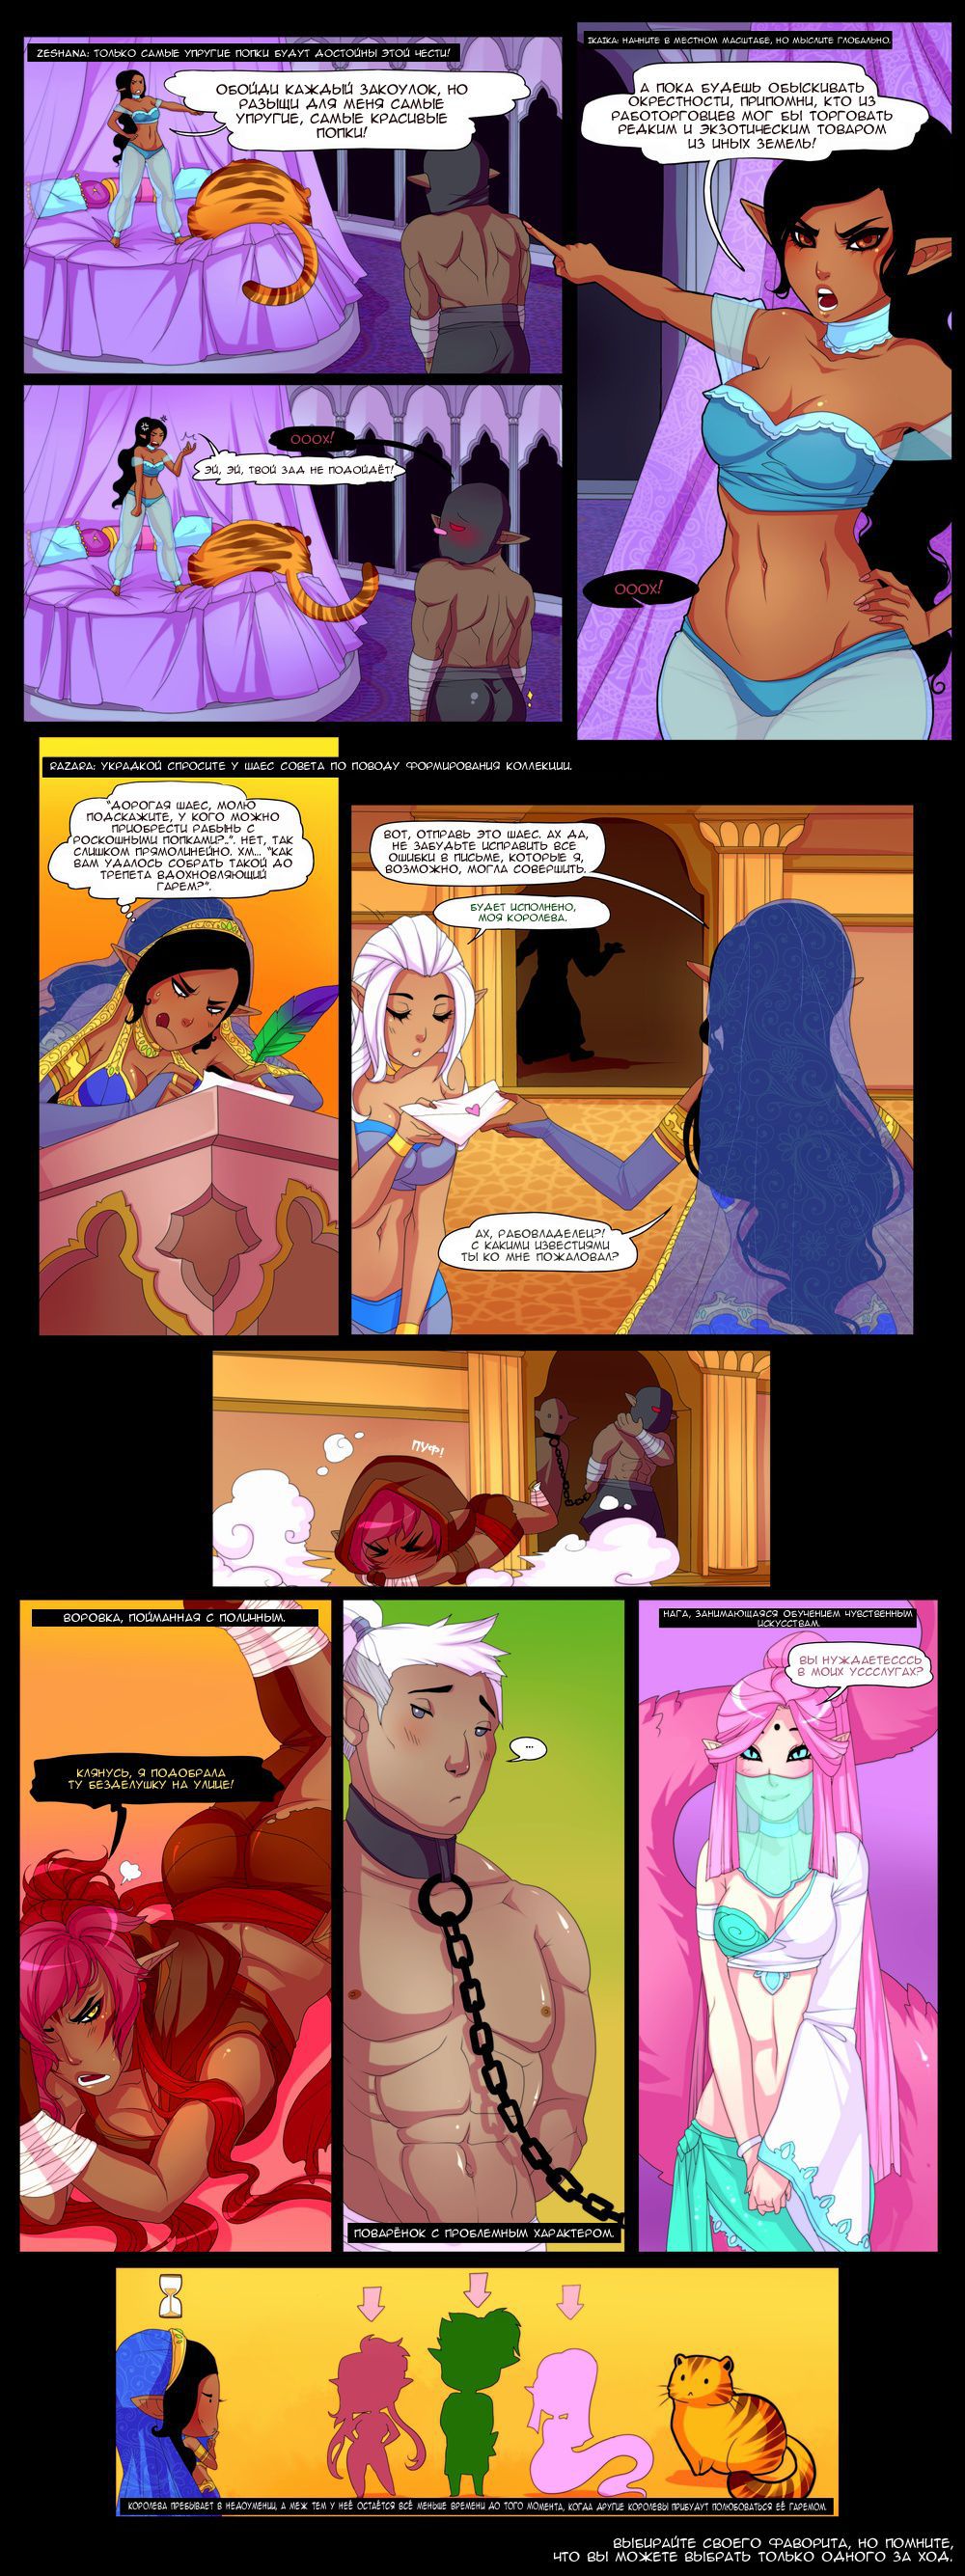 [Lunareth] Queen of Butts [Russian] (Ongoing) 3